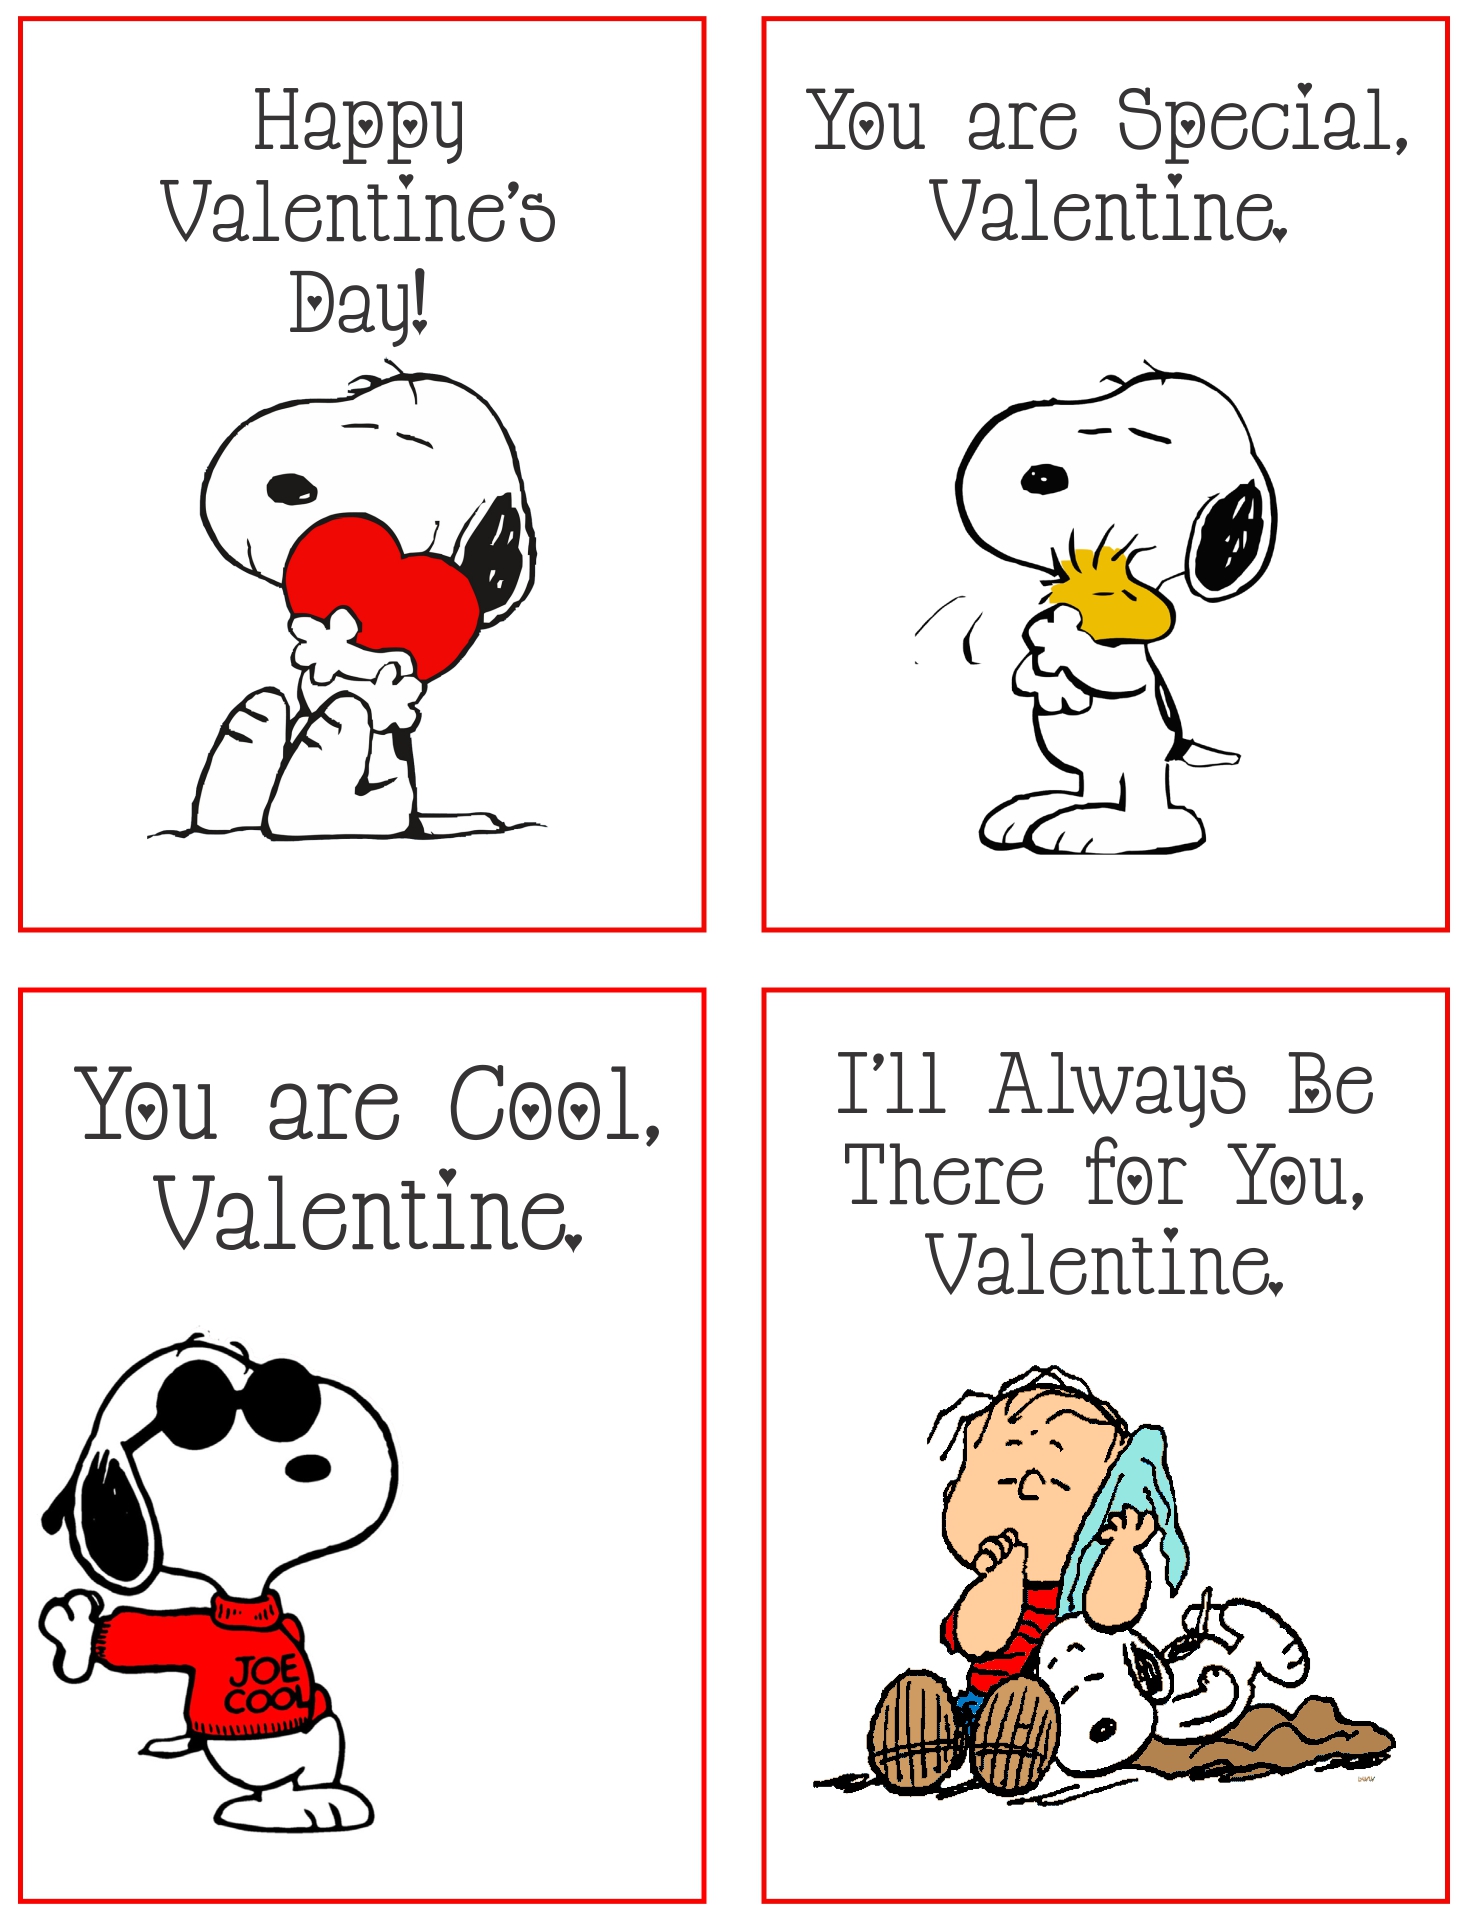 Valentines Cards Printable Funny